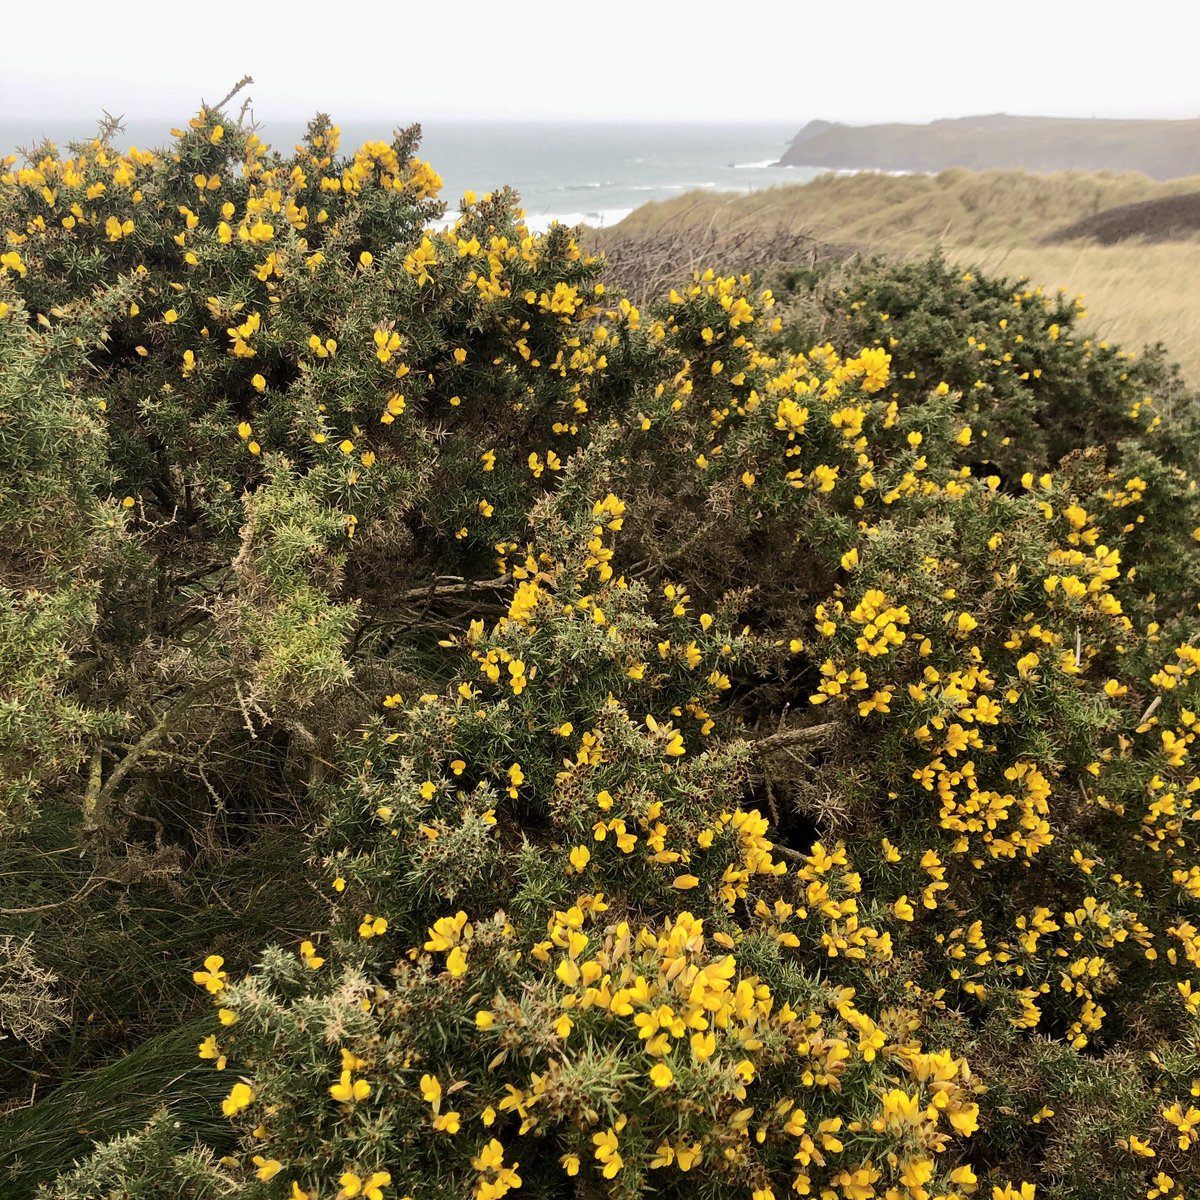 Gorse on Gear Sands brightening up a rather grey new year’s morning in Cornwall. Other than the gorse and an occasional daisy nothing else to report unfortunately! @BSBIbotany #NewYearPlantHunt